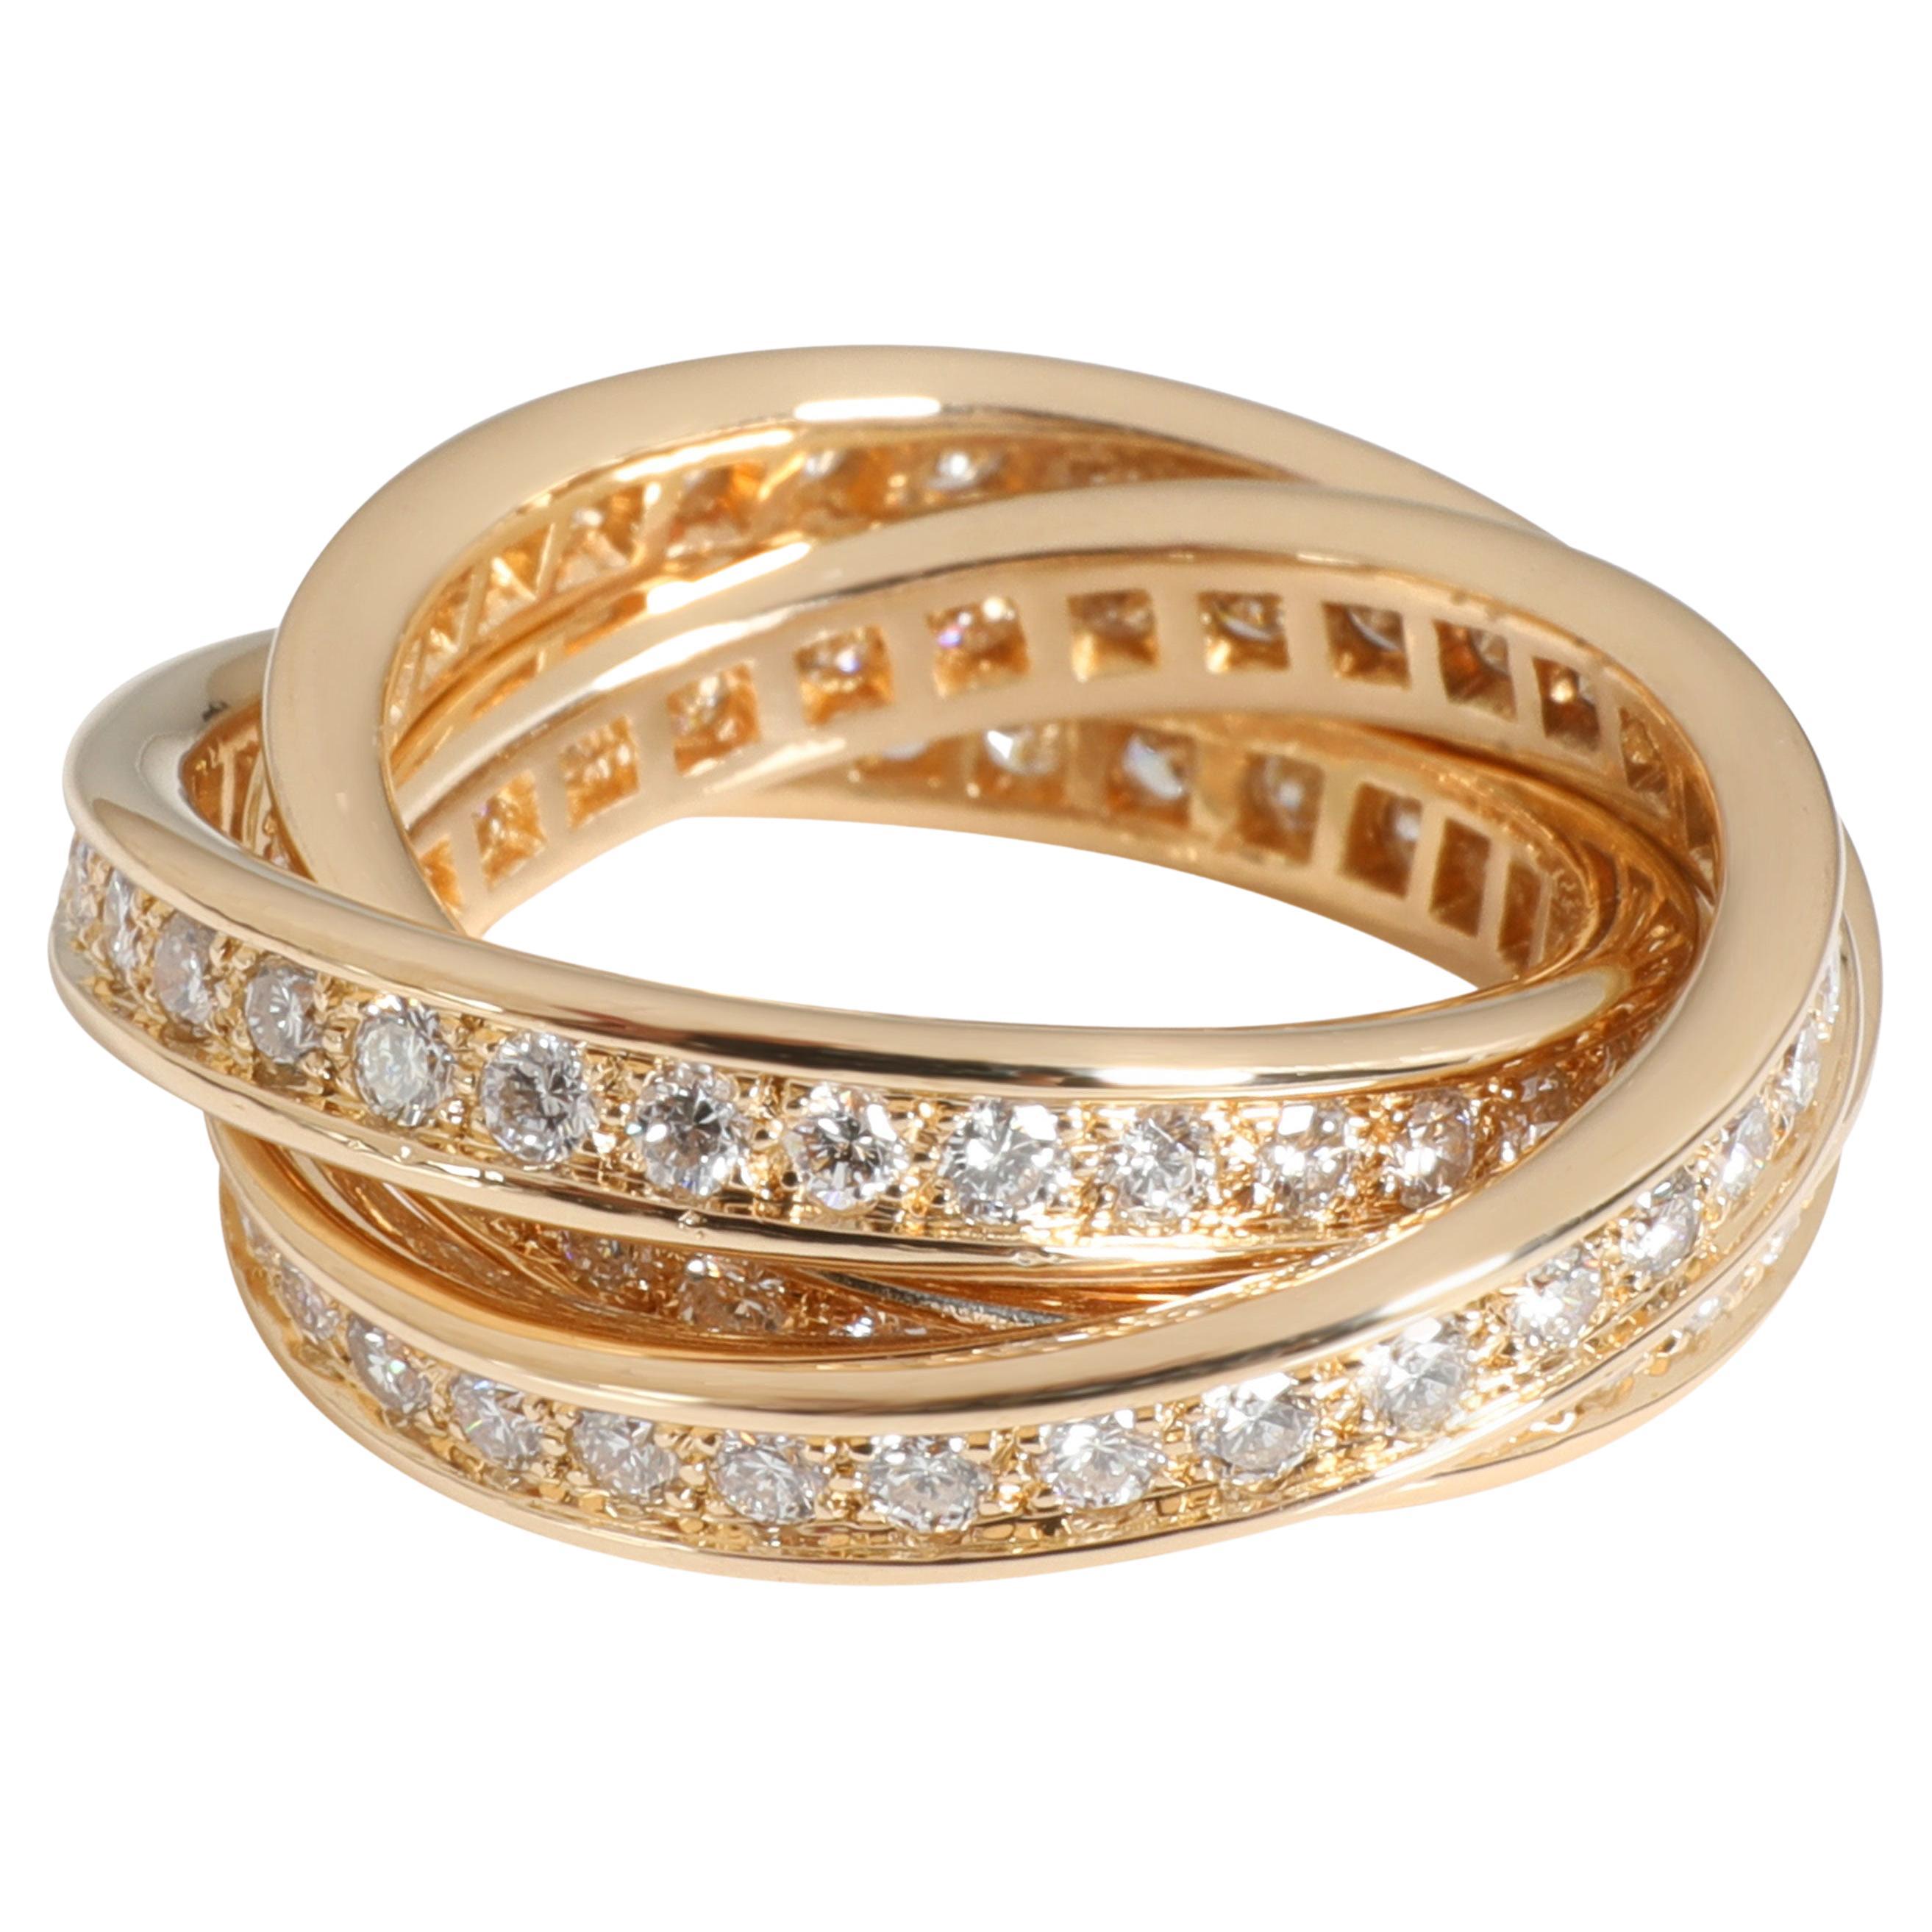 Cartier Vintage Trinity Diamant-Ring in 18k 3 Tone Gold 1,75 CTW